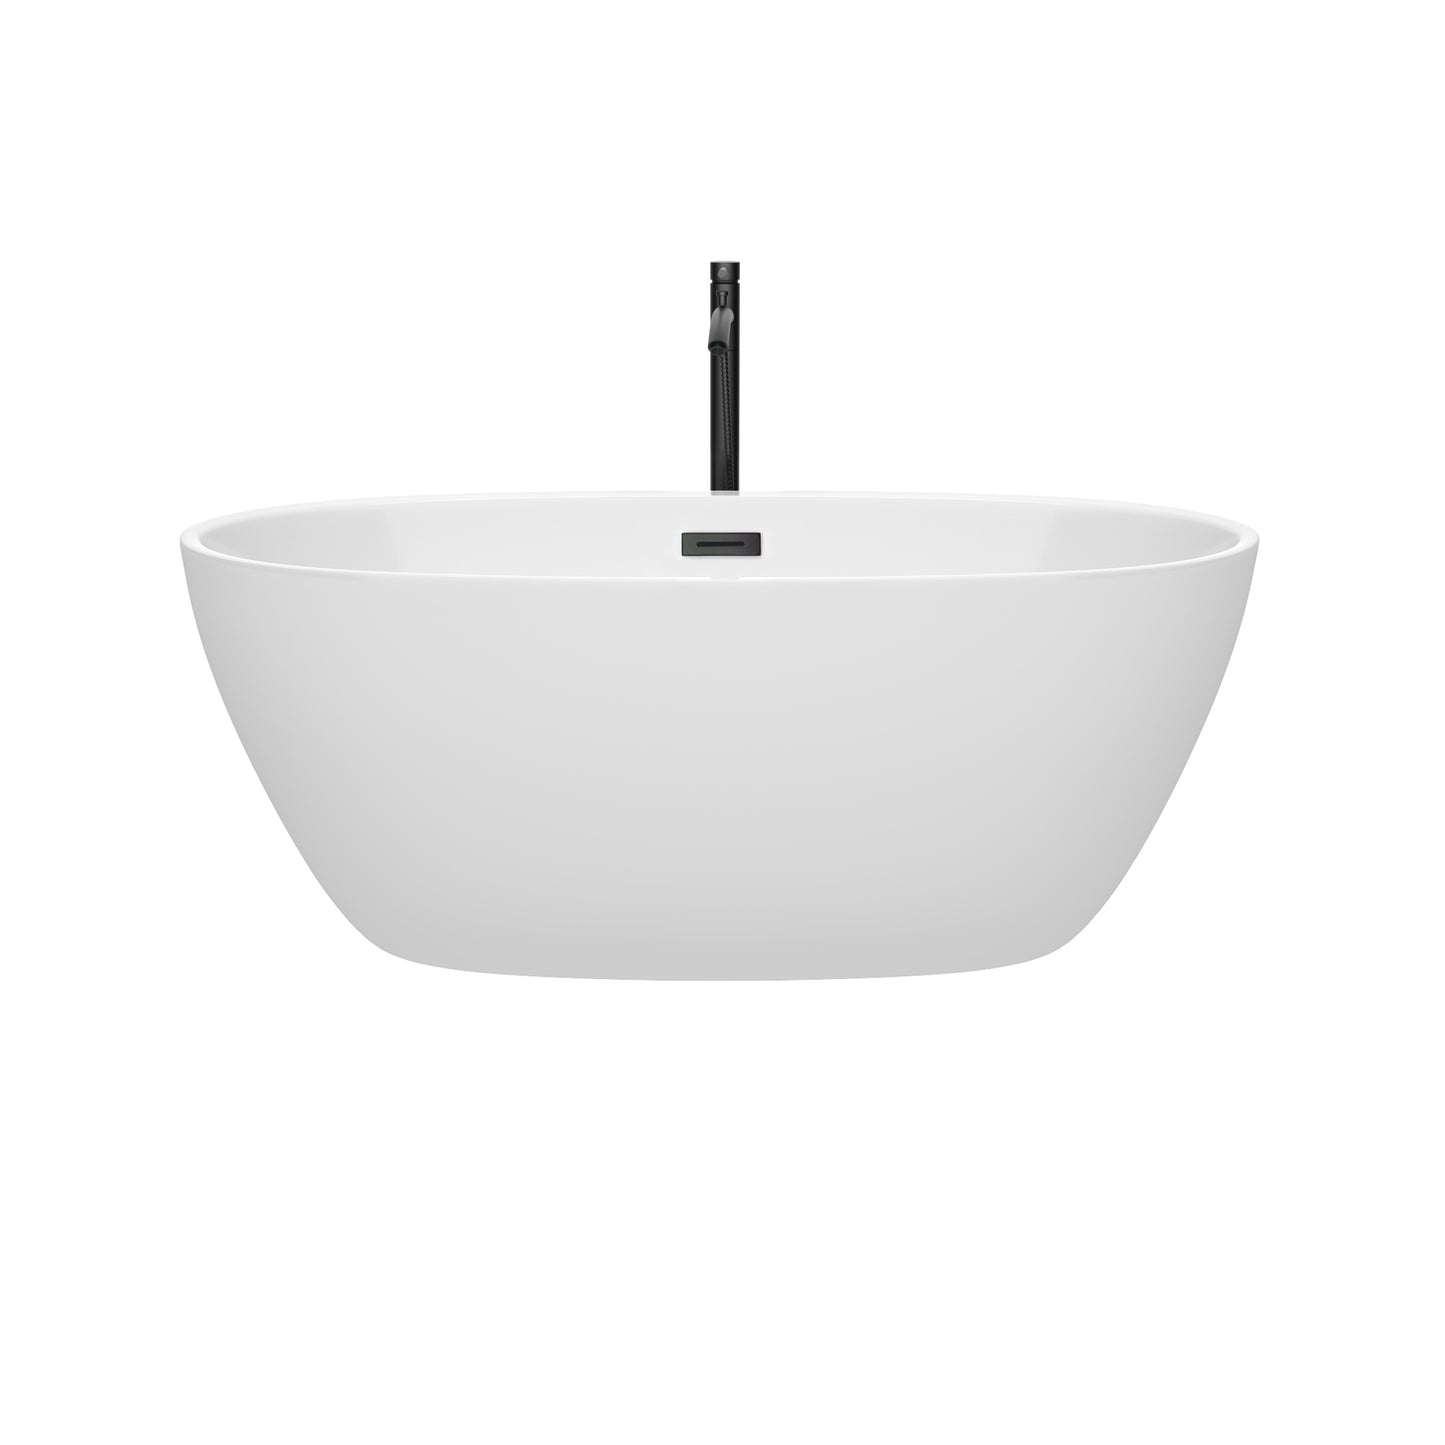 Wyndham Collection Juno 59 Inch Freestanding Bathtub in White with Floor Mounted Faucet, Drain and Overflow Trim in Matte Black - Luxe Bathroom Vanities